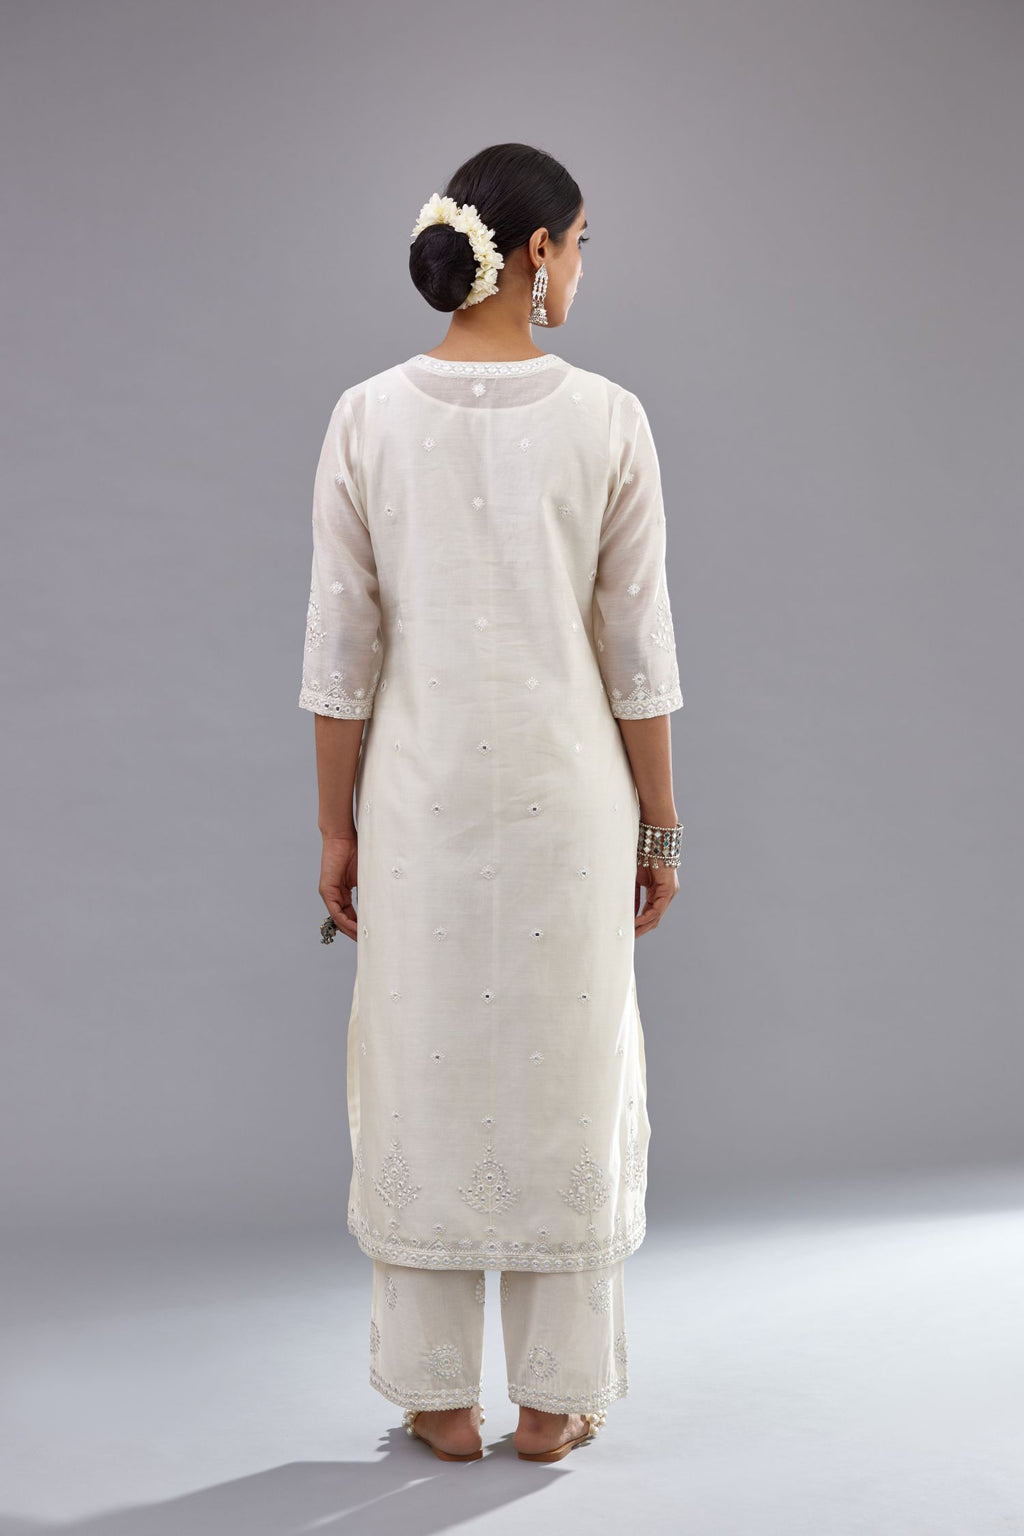 Off white silk Chanderi straight long kurta set with round neck, highlighted with off-white thread and mirror embroidery.